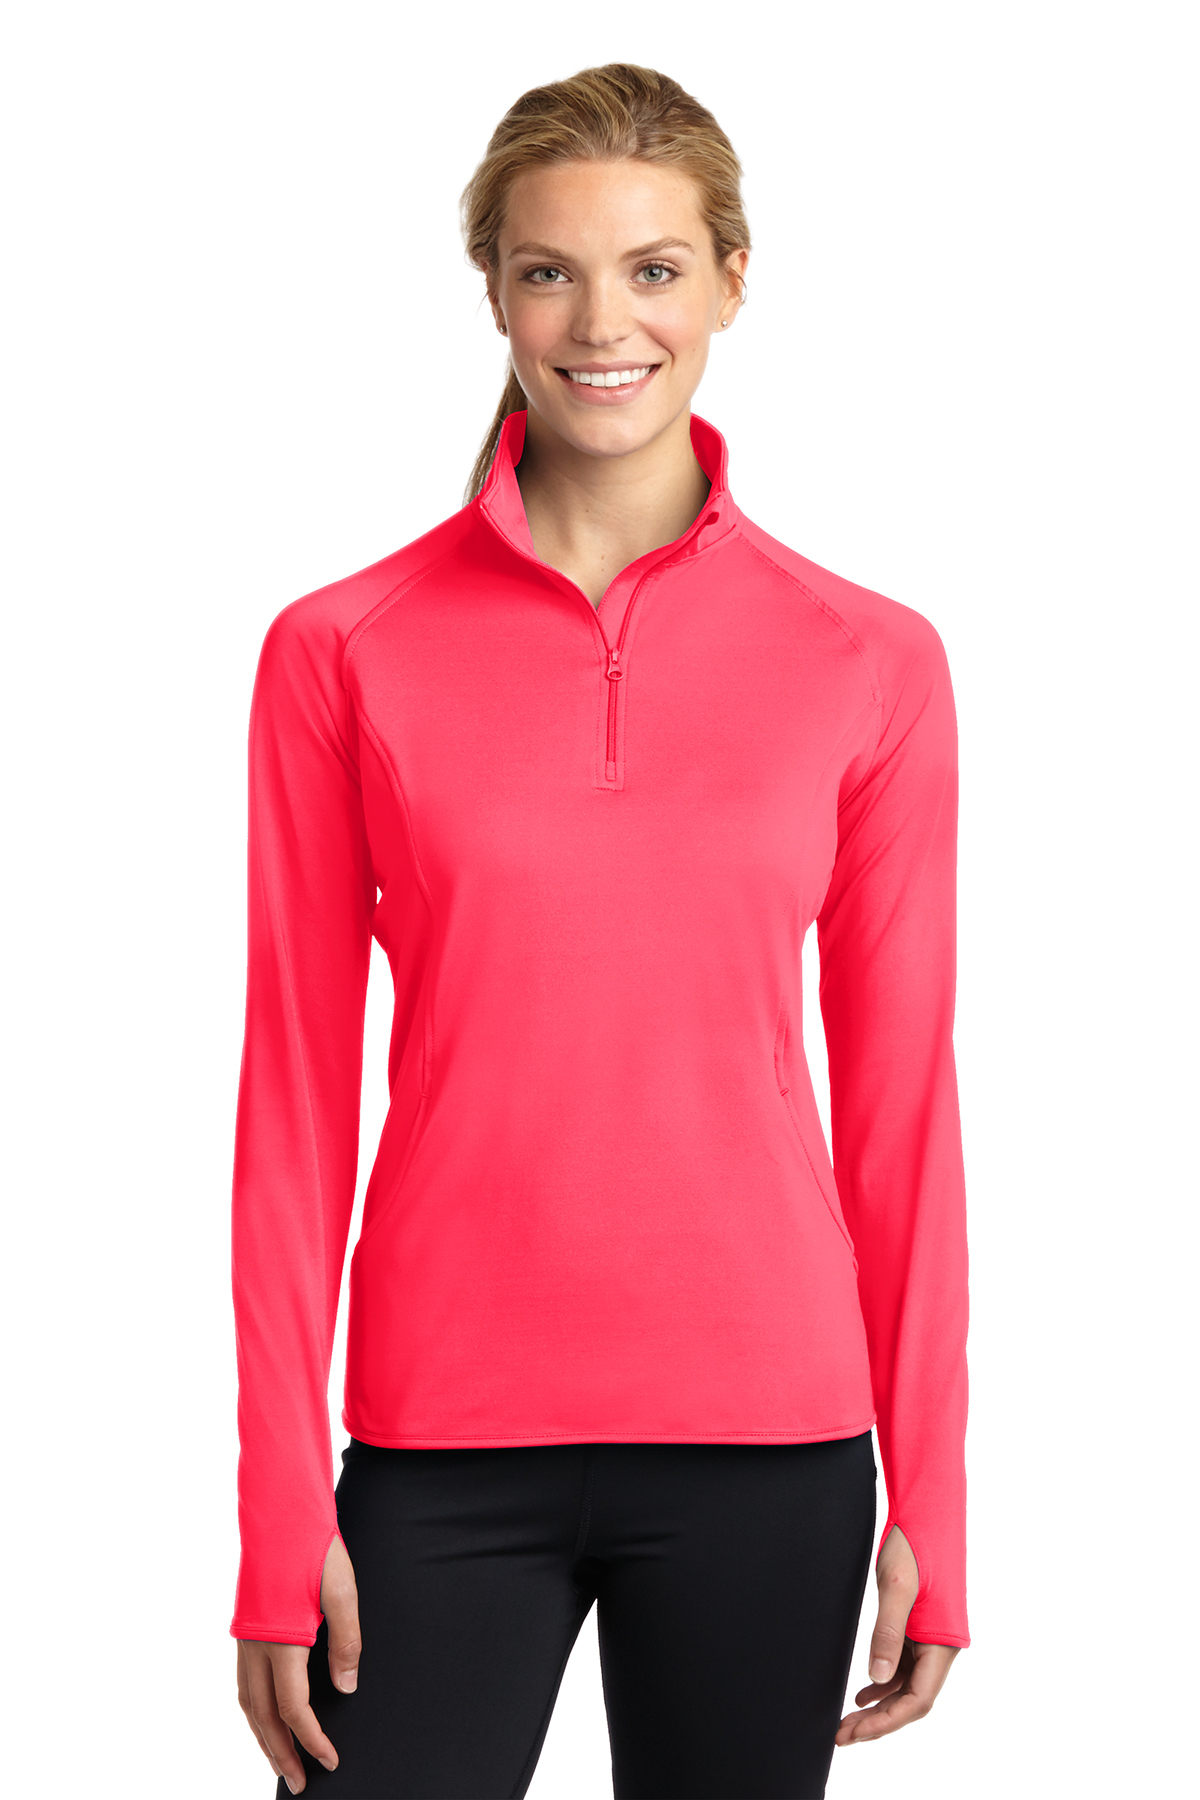 Songling Women's Athletic Full Zip Up Lightweight Workout Slim Fit